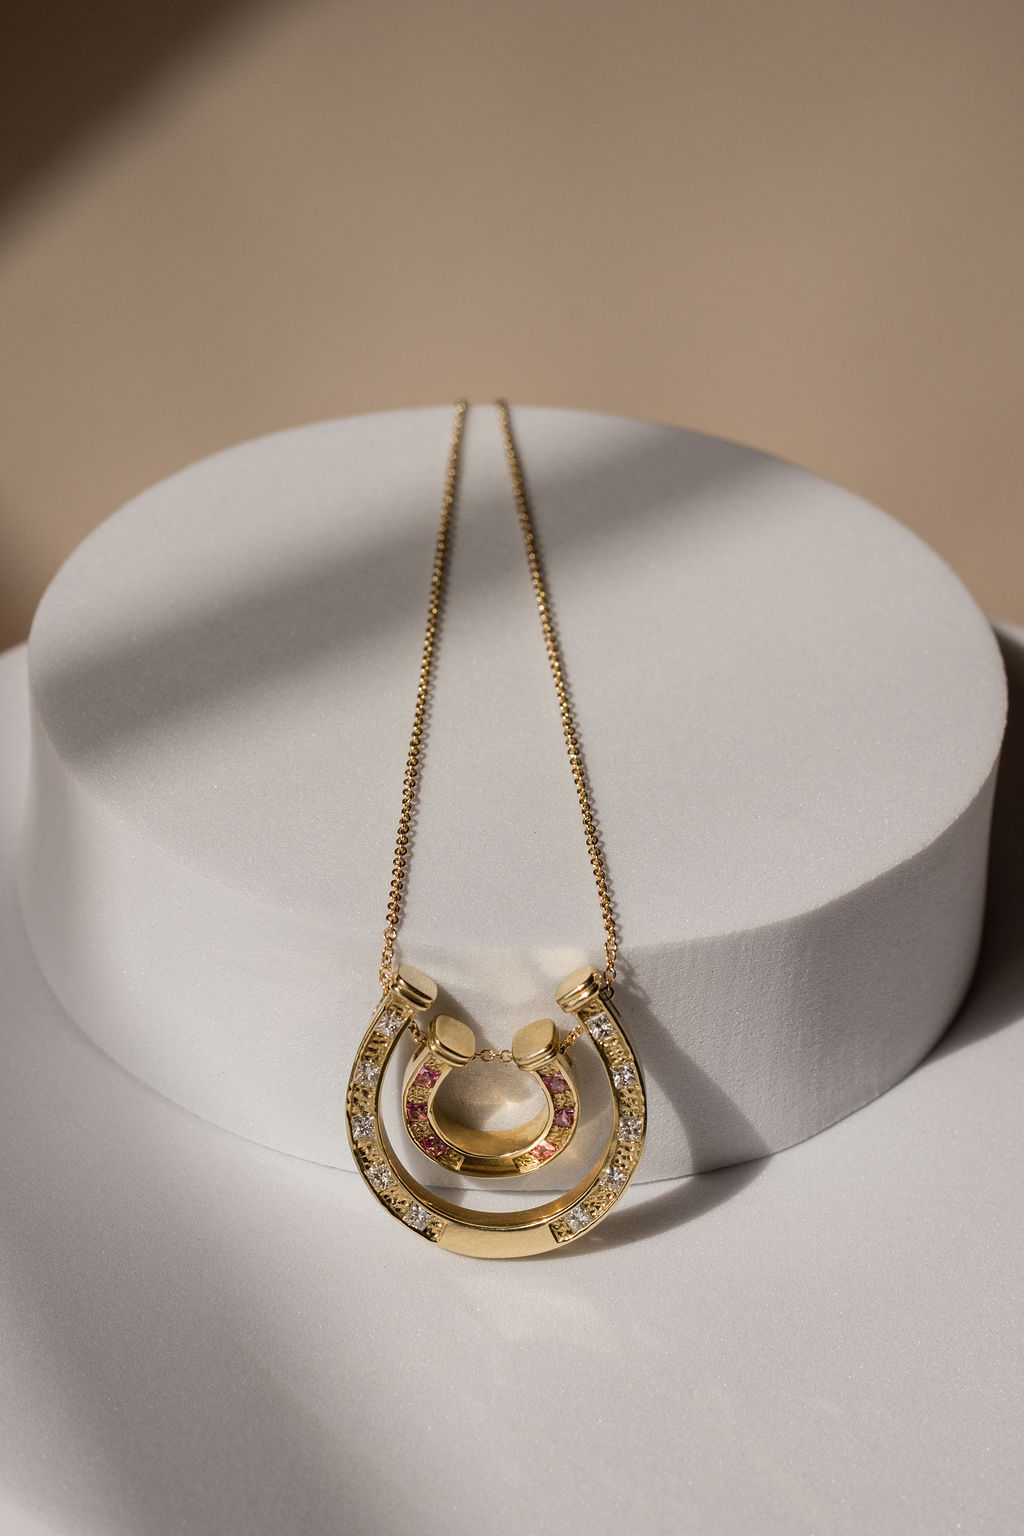 Jewelry Product Photography Northern Virginia